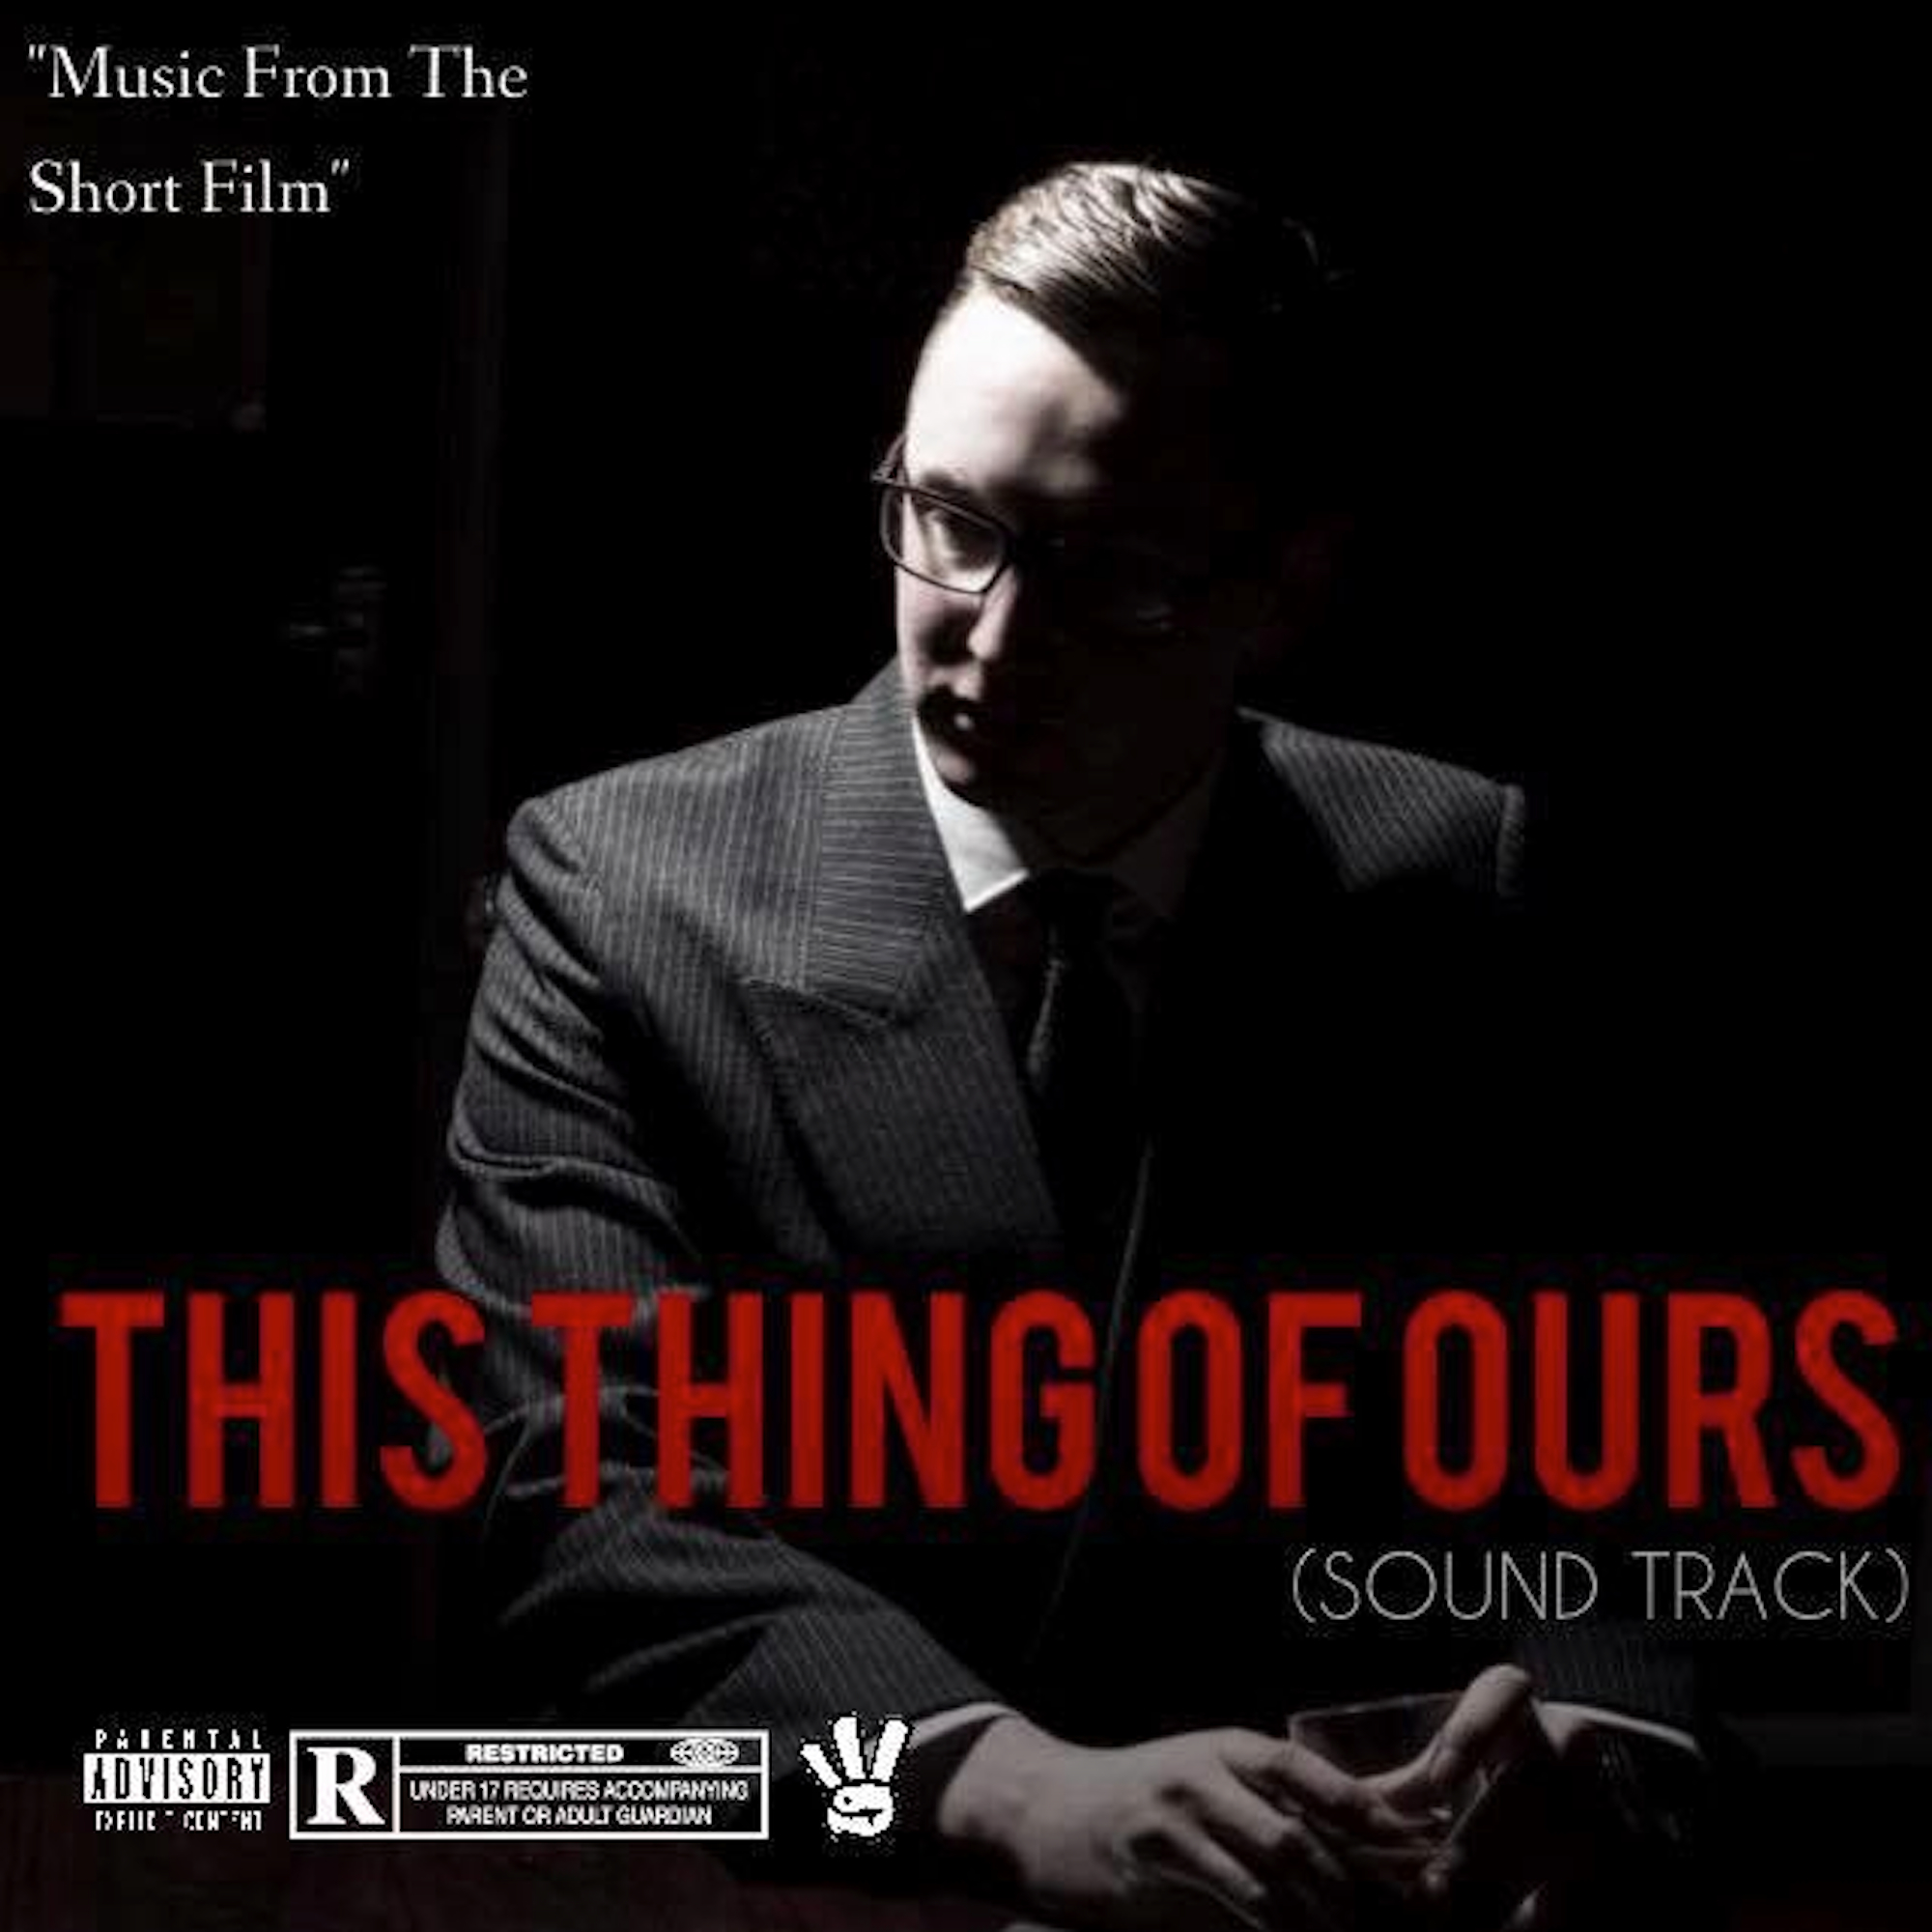 Baby dont do it Music from Short Film " This Things of Ours